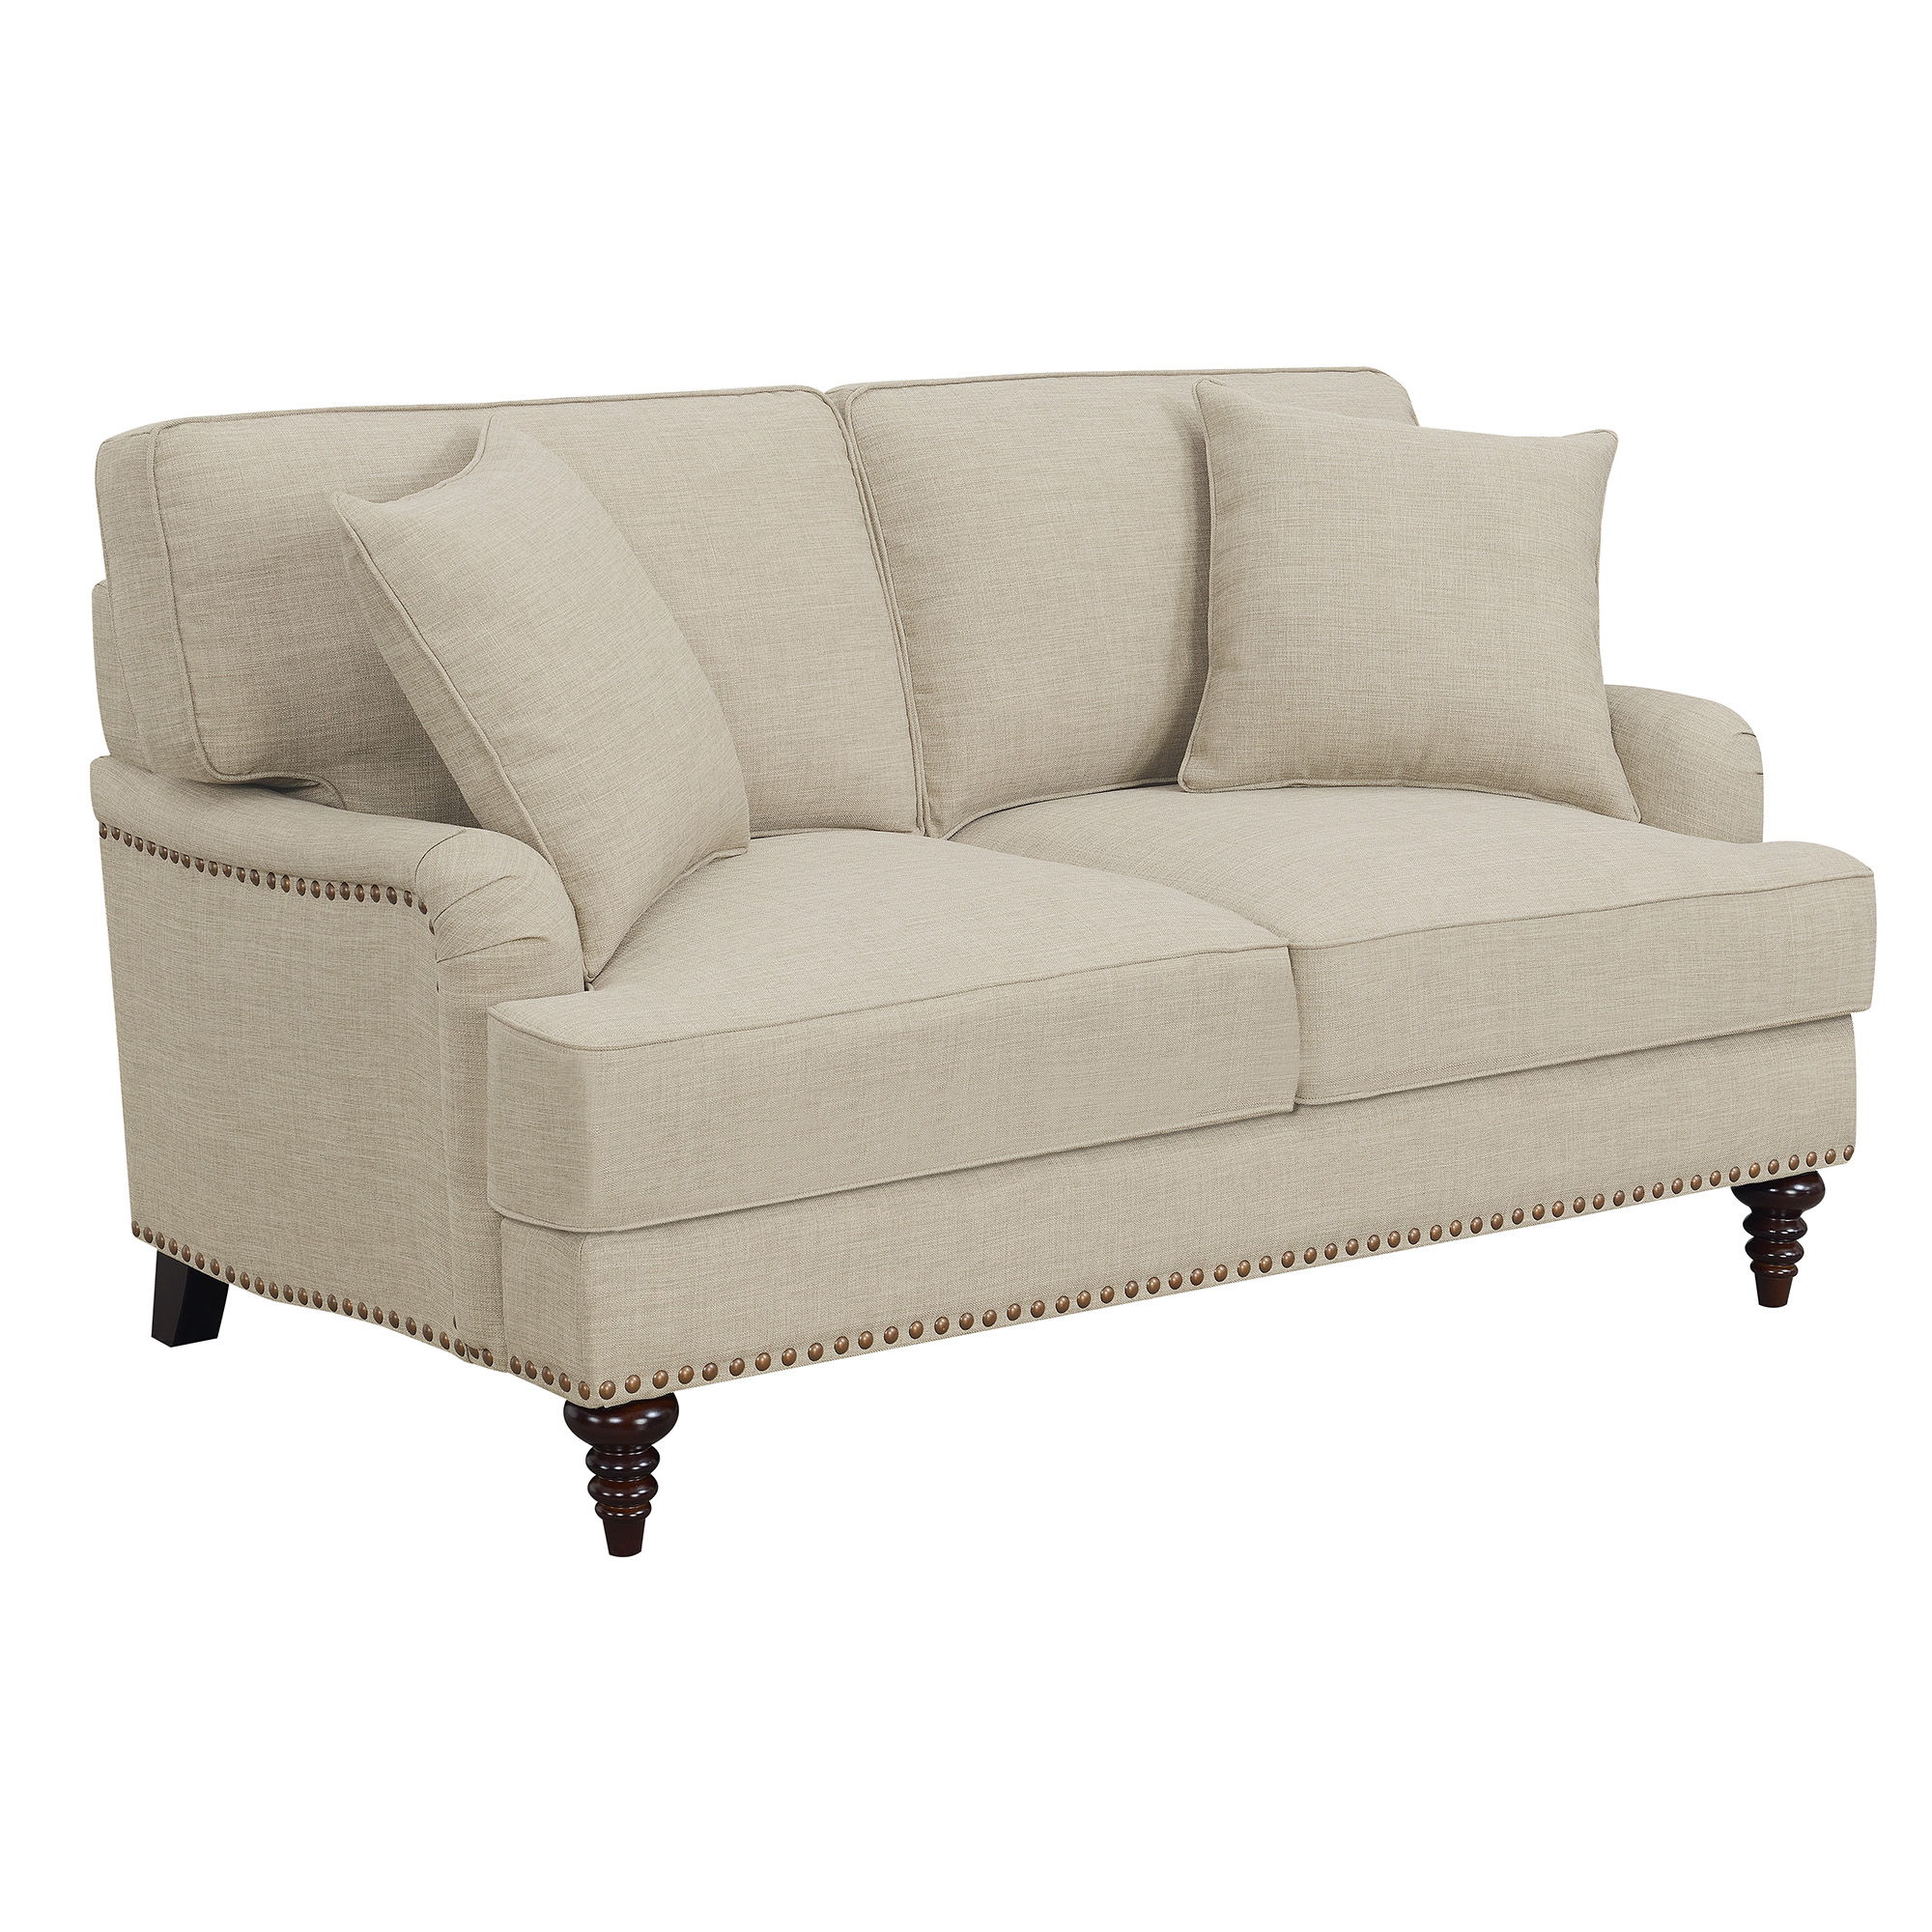 Abby Loveseat W/Pillows in Heirloom Natural / Linen